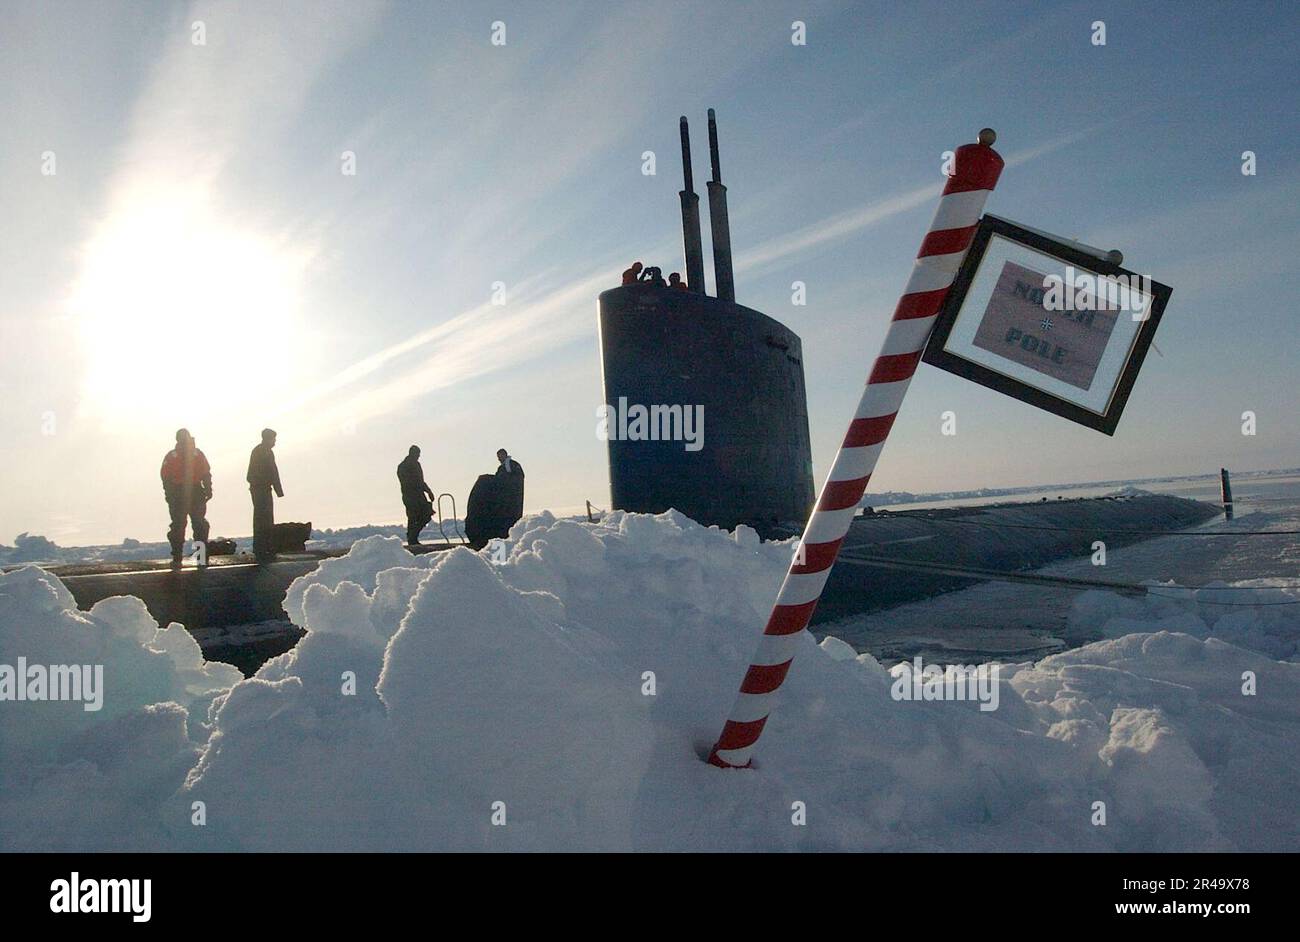 US Navy The crew of the Los Angeles-class attack submarine USS Hampton (SSN 767) posted a sign reading North Pole made by the crew after surfacing in the polar ice cap region Stock Photo